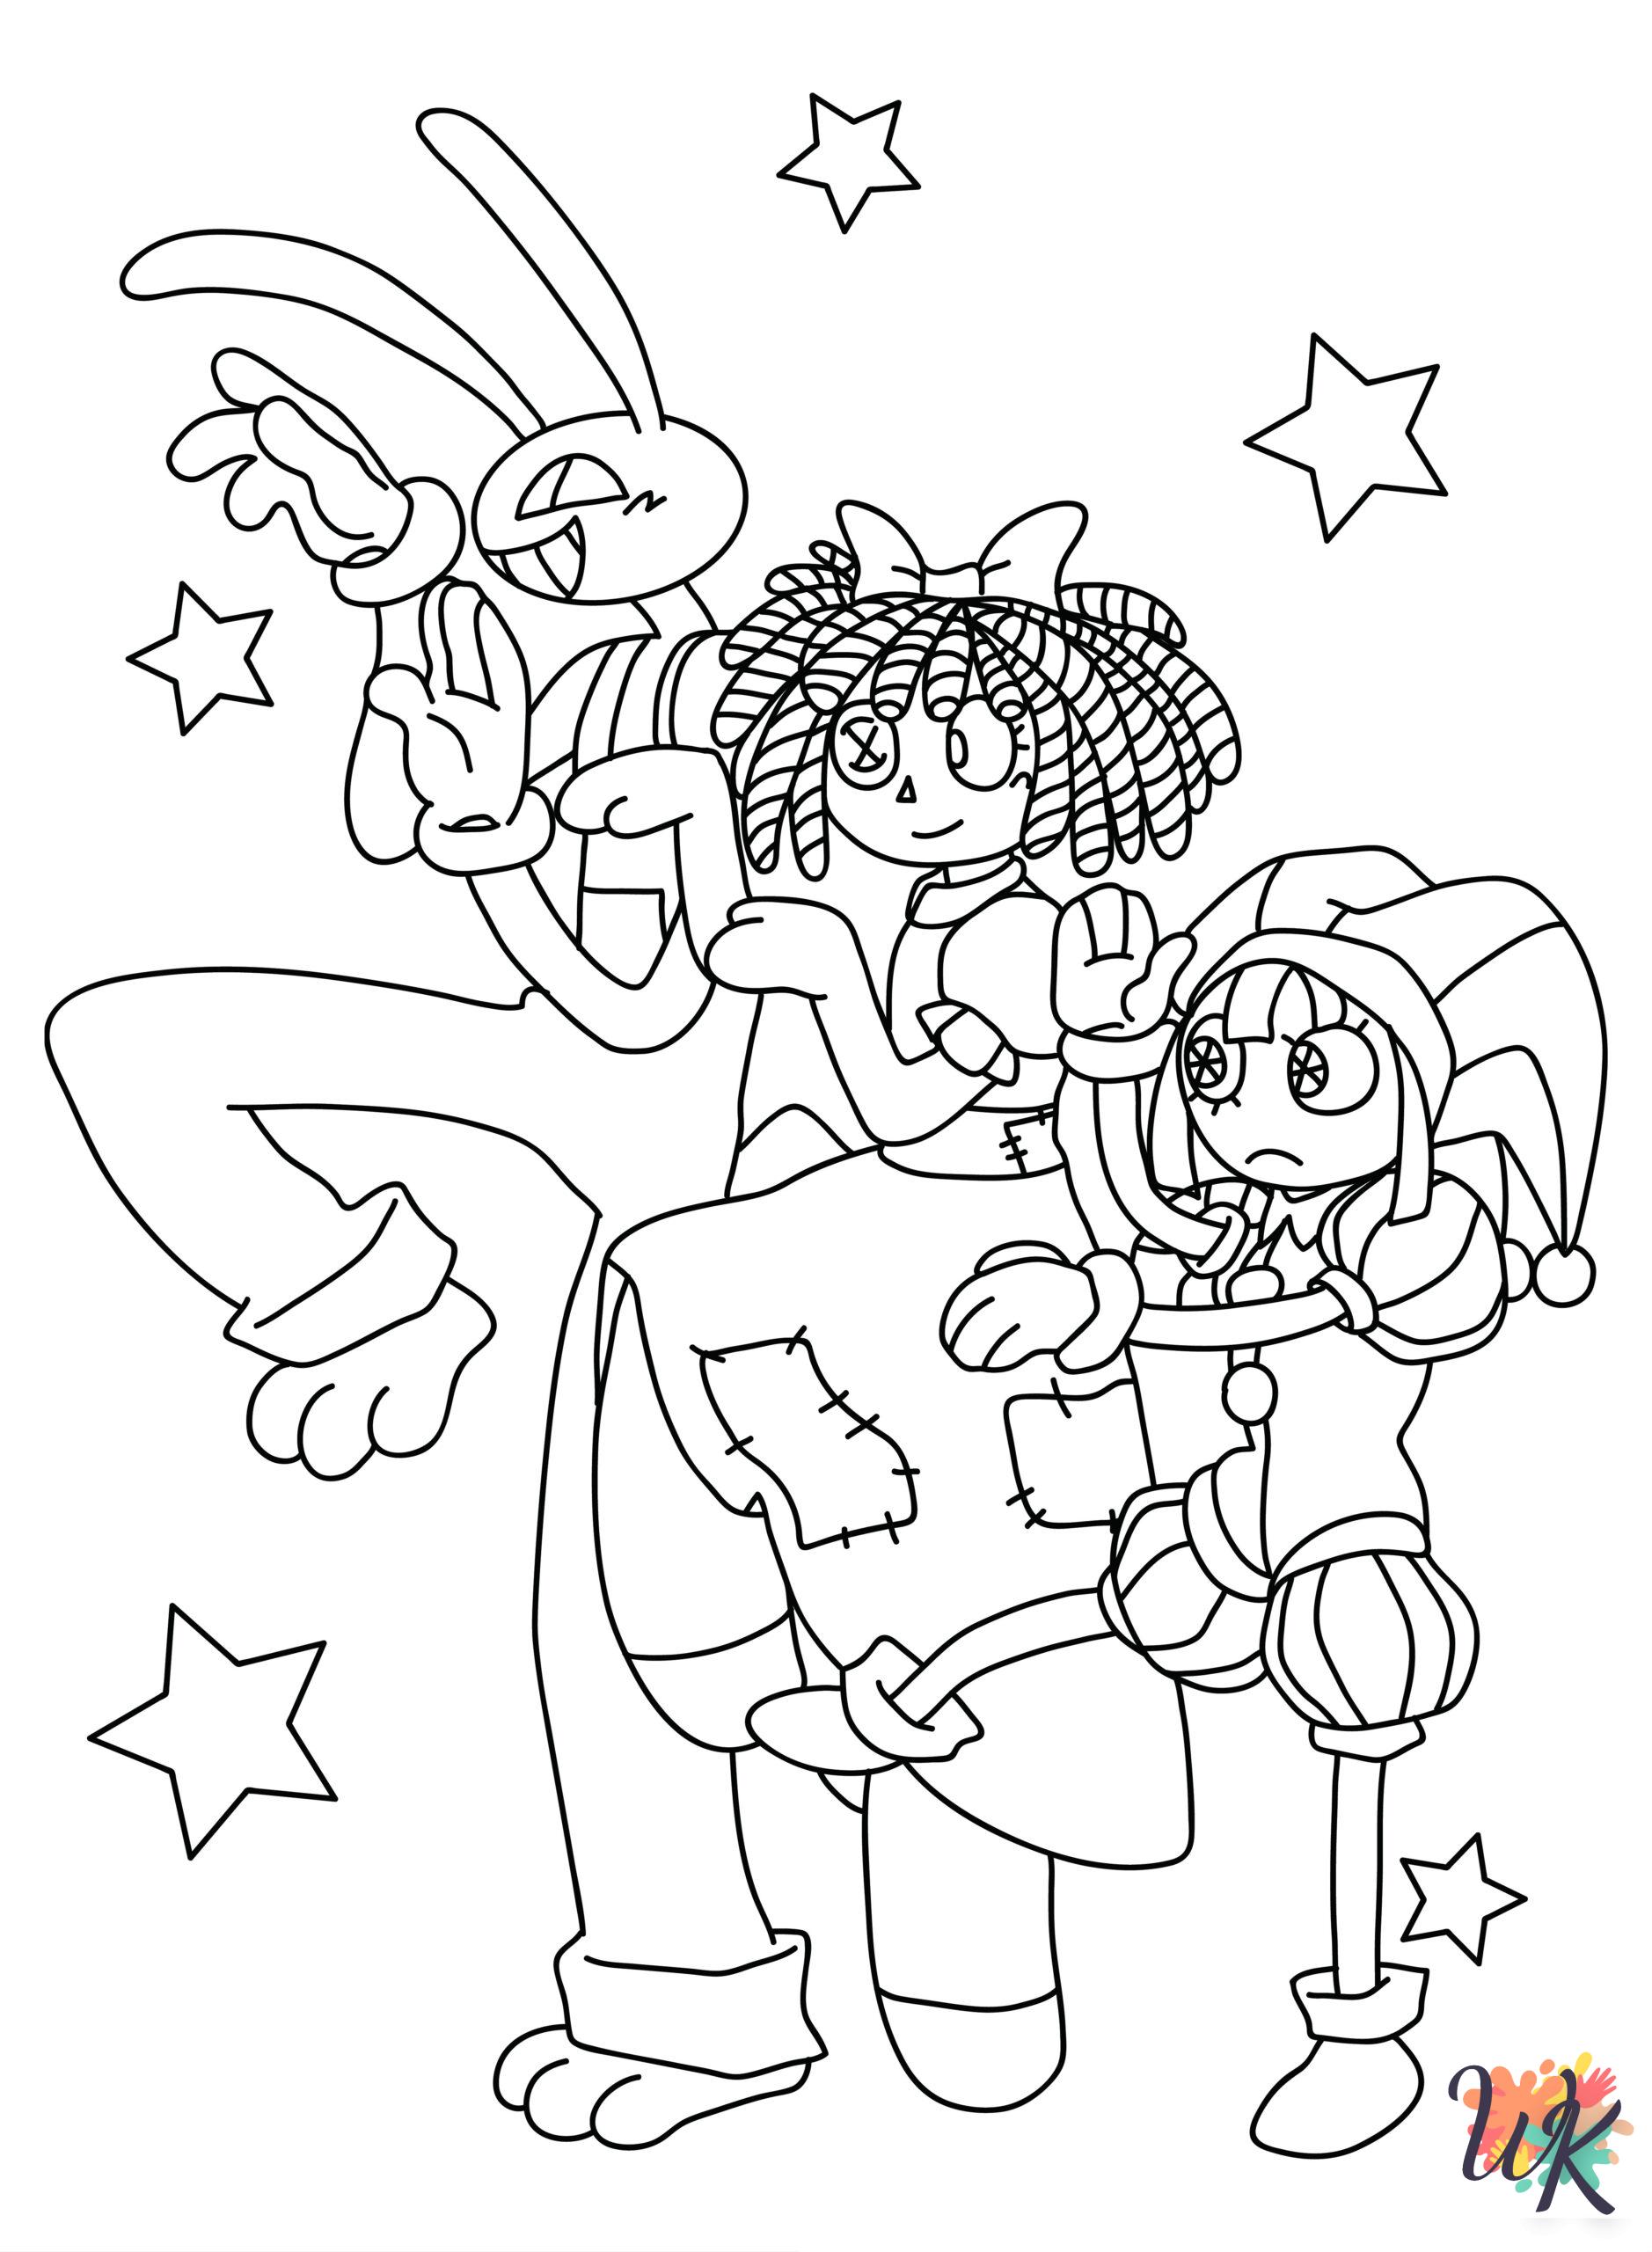 The Amazing Digital Circus Coloring Pages 14